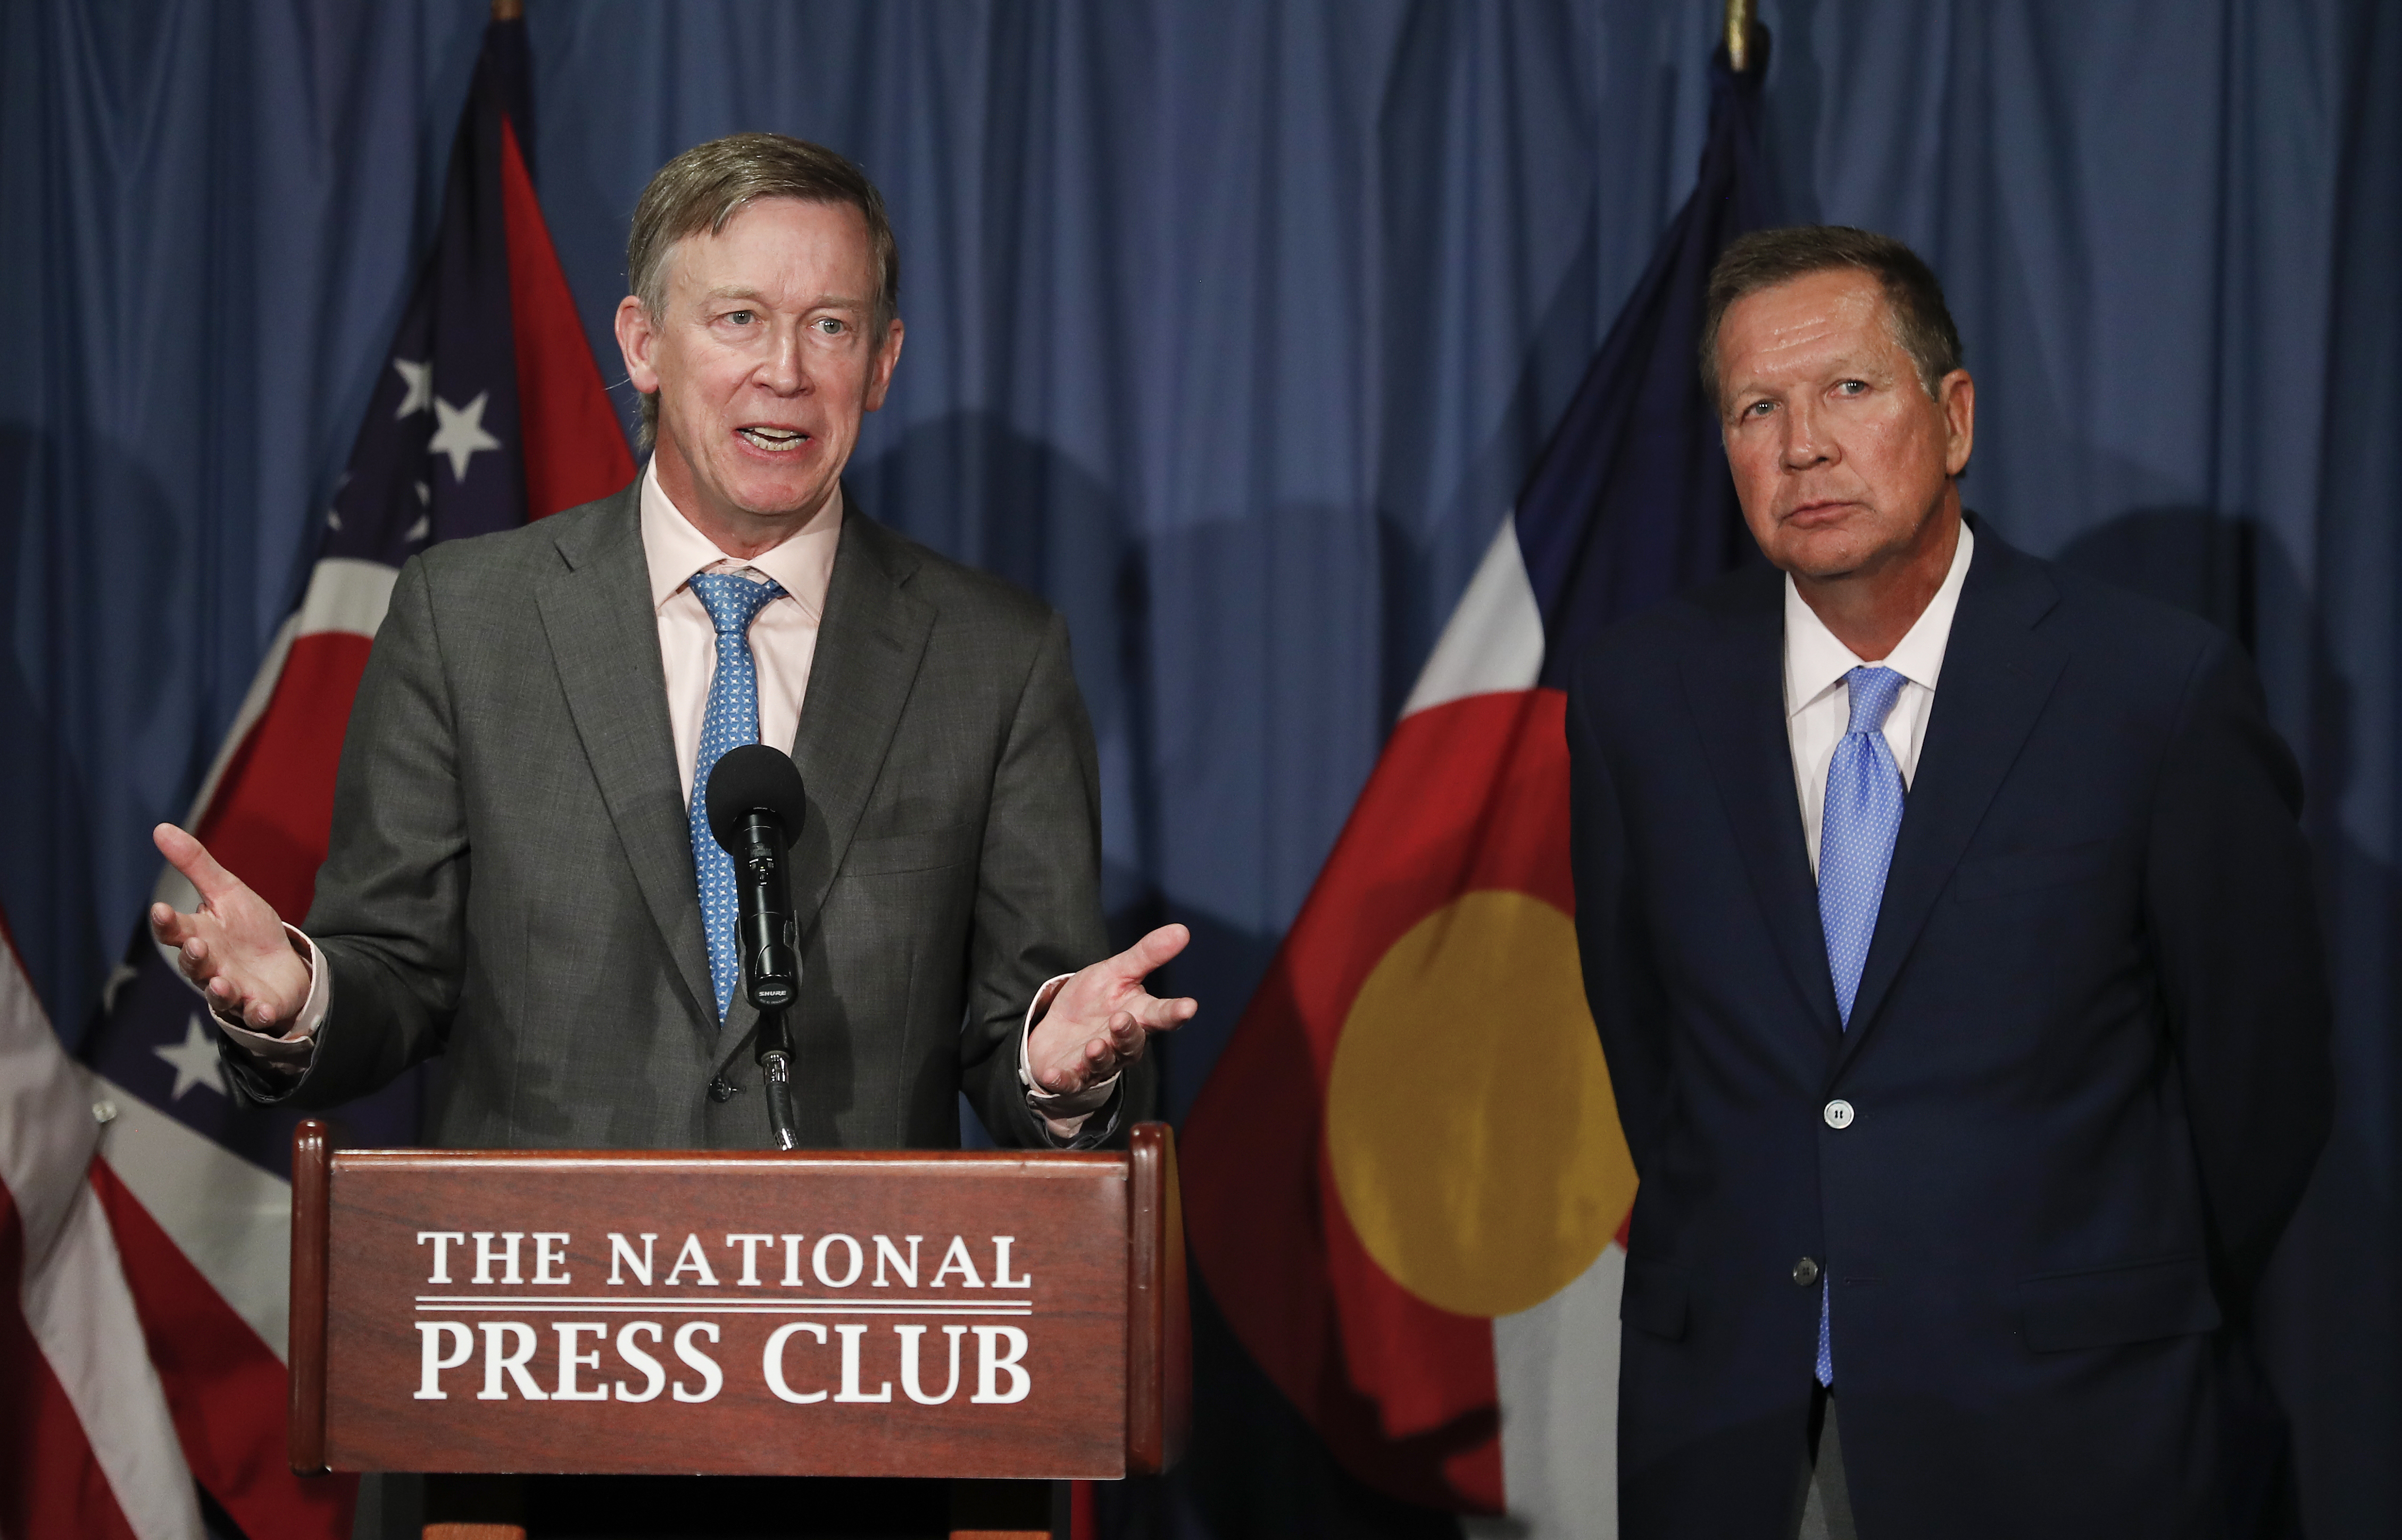 Colorado Gov. John Hickenlooper, left, joined by Ohio Gov. John Kasich, speaks during a news conference at the National Press Club in Washington on June 27, 2017. (Carolyn Kaster&mdash;AP)